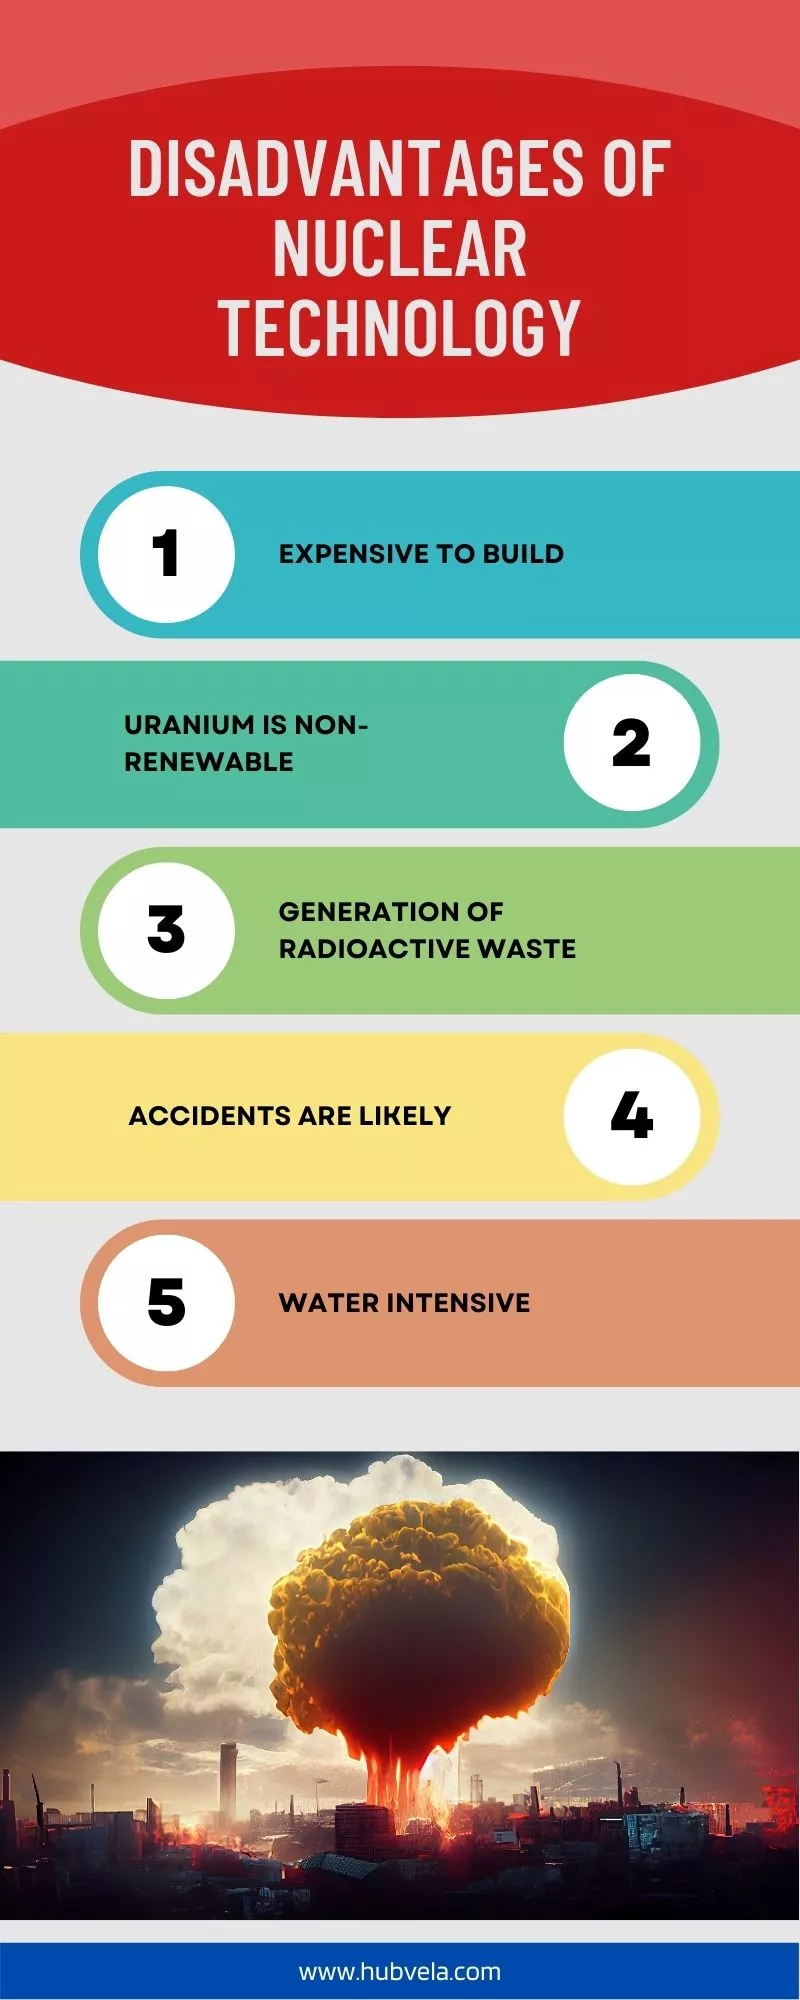 Disadvantages of Nuclear Technology Infographic